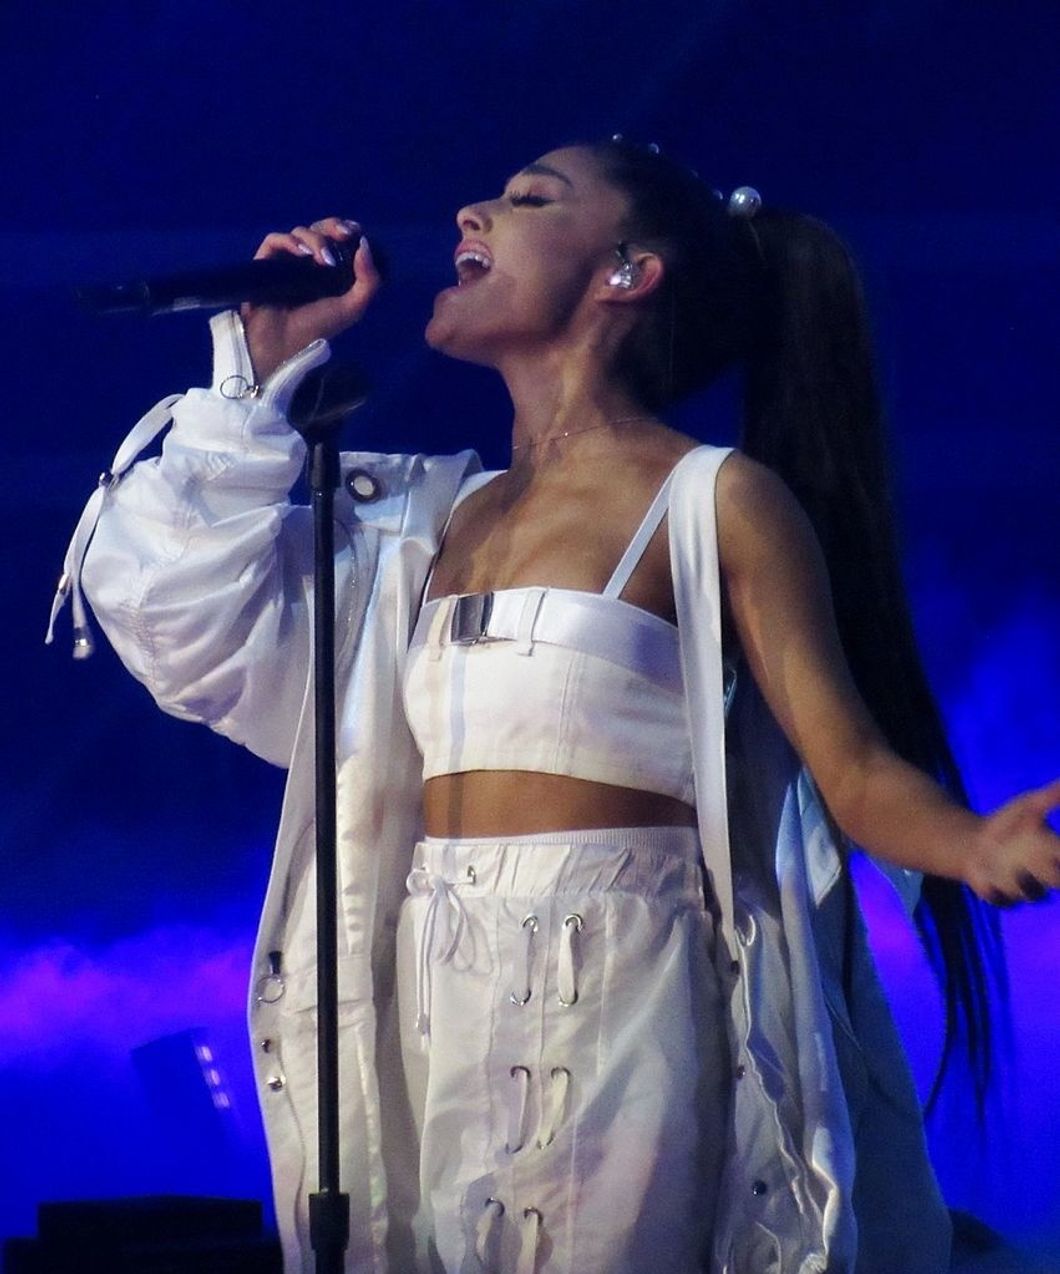 https://commons.wikimedia.org/wiki/File:Ariana_Grande_performing_during_Dangerous_Woman_Tour_in_Manchester.jpeg